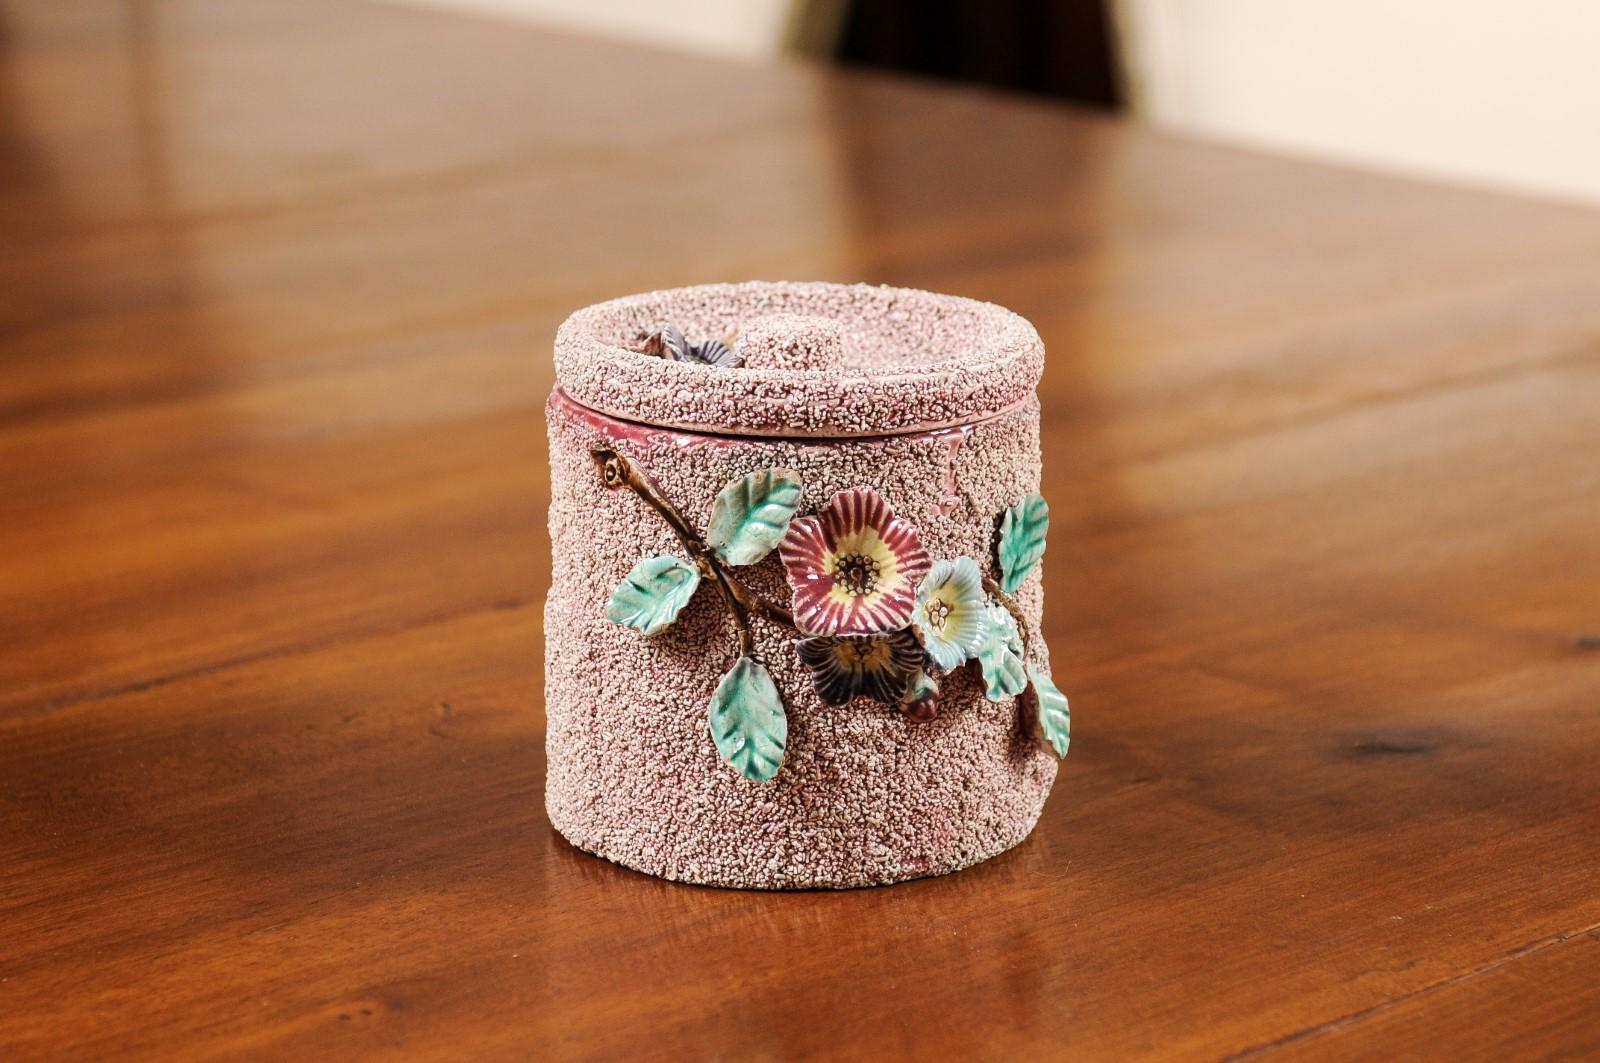 An English pottery box from the 20th century, with floral motifs, textured ground and lid. Created in England during the 20th century, this decorative container features a cylindrical body topped with a conforming lid. Adorned with red, purple and